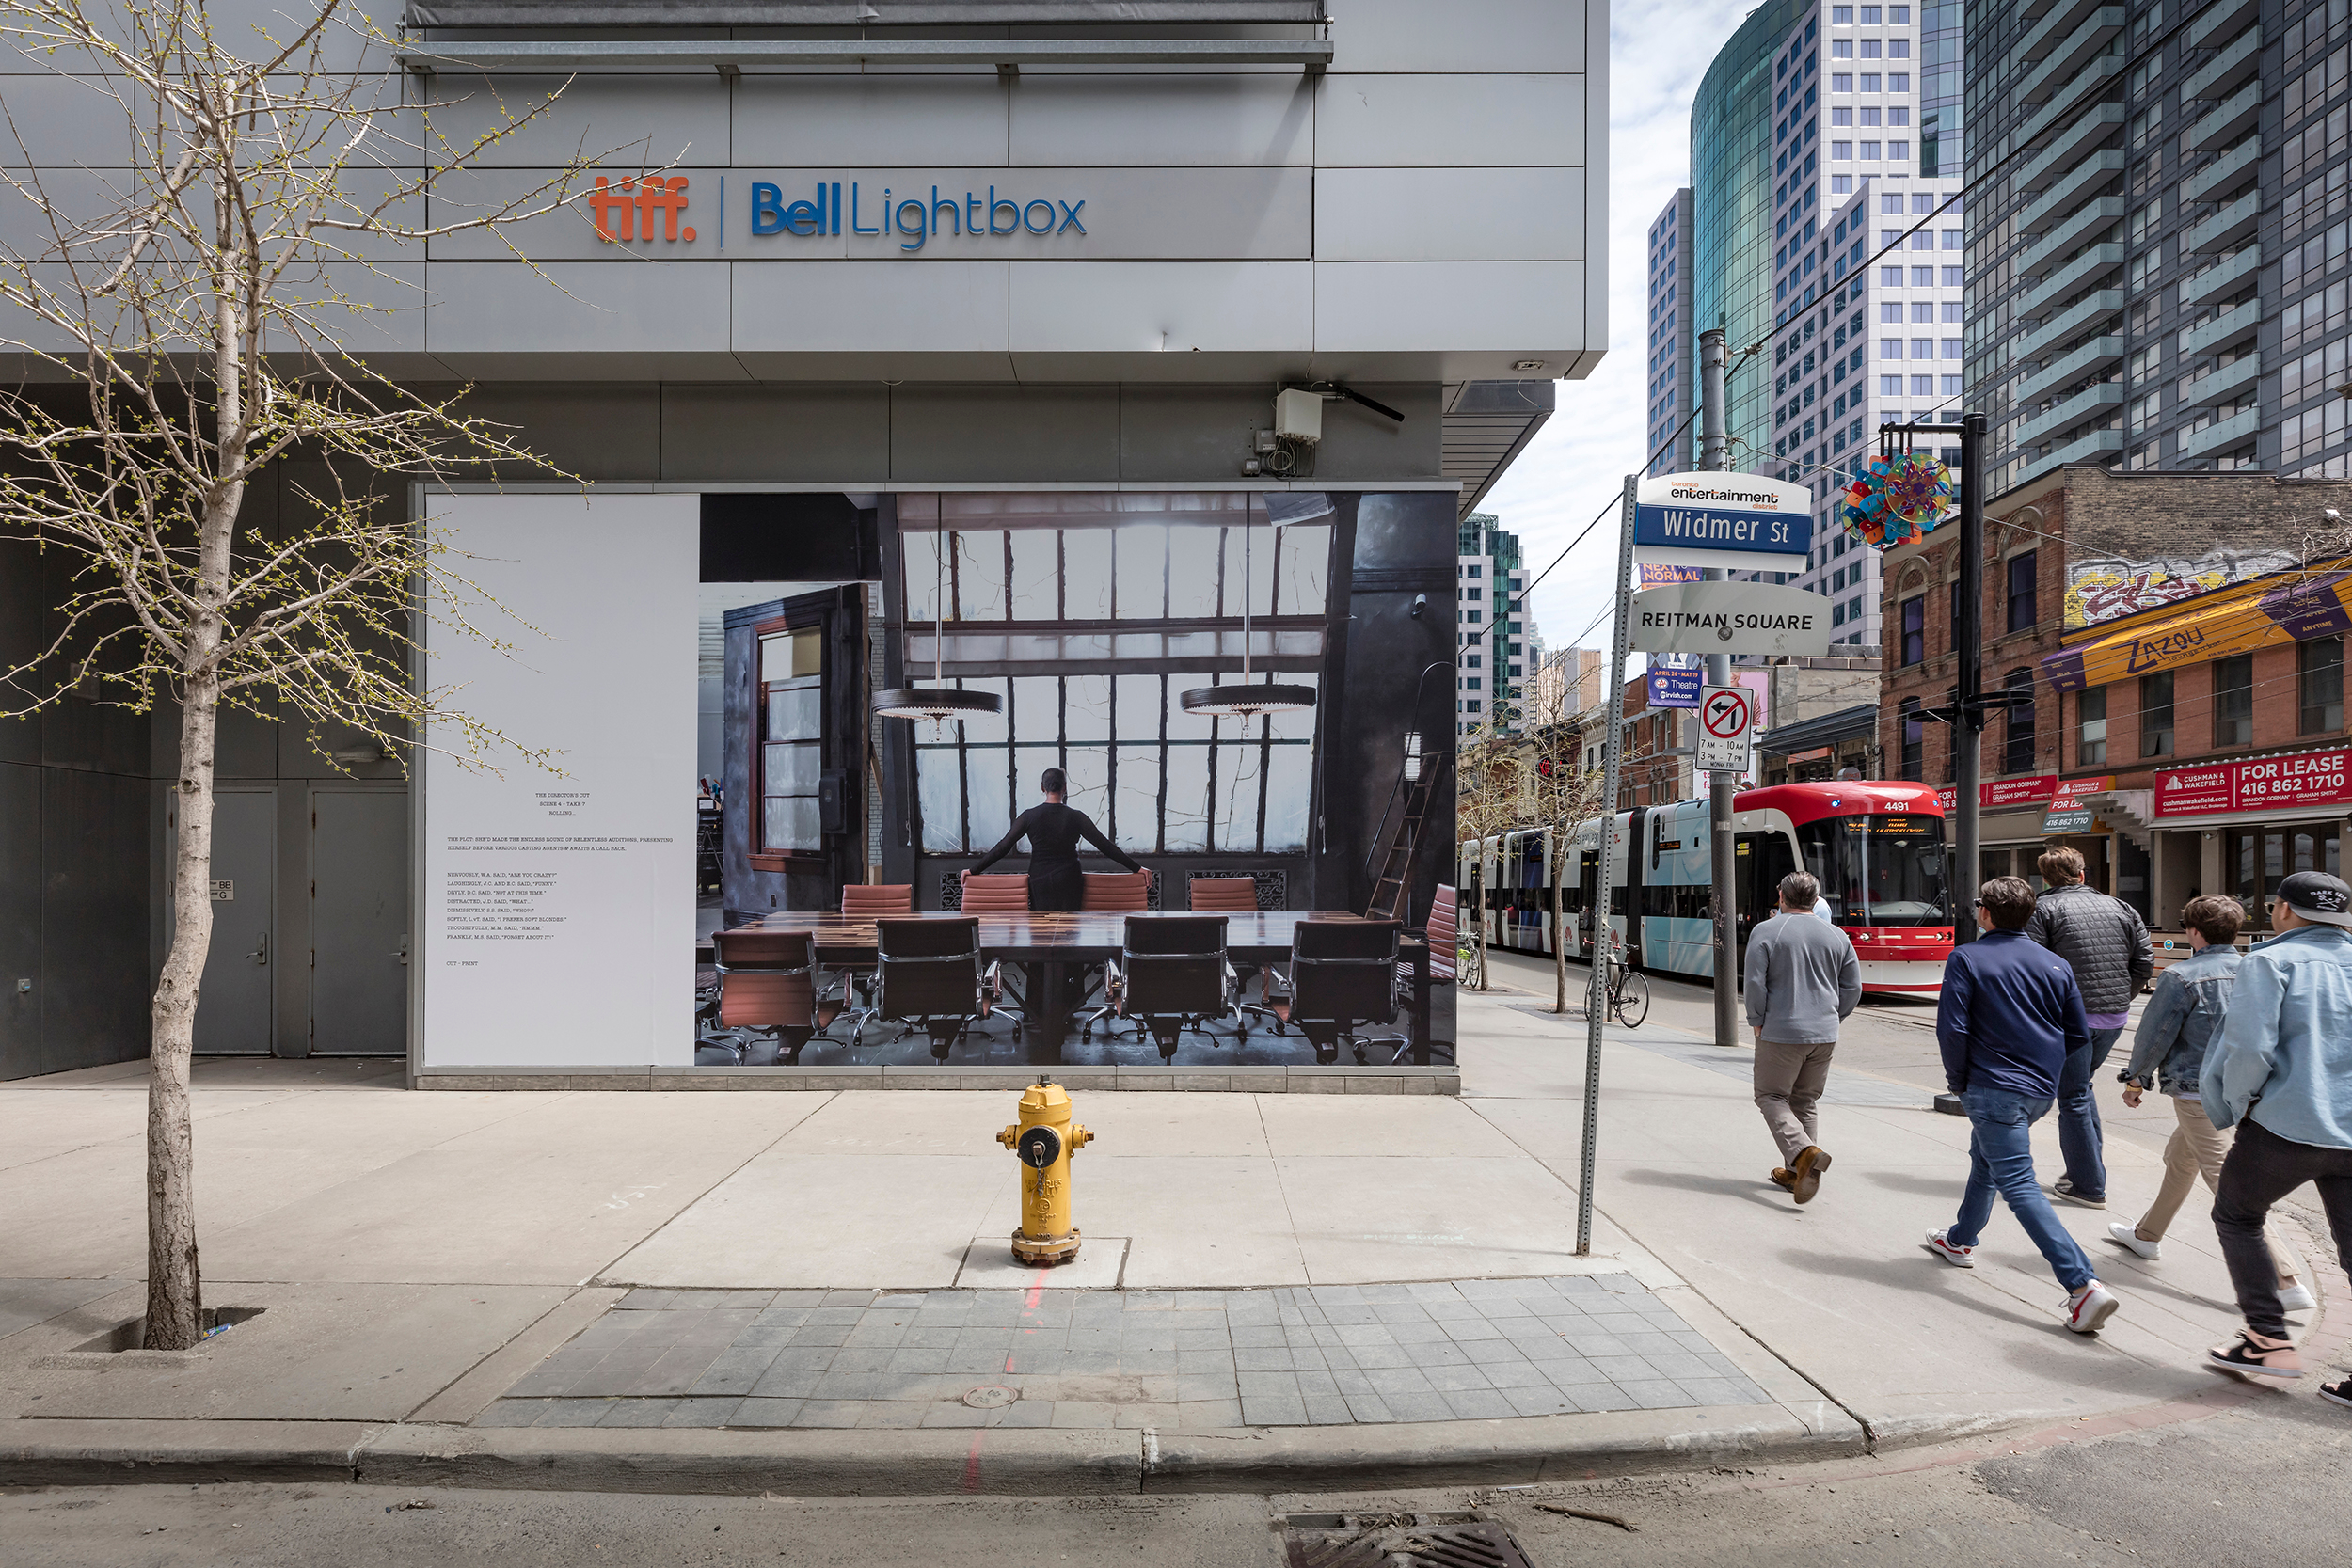     Carrie Mae Weems, irector&#8217;s Cut and The Bad and the Beautiful), 2016., Public Installation at TIFF Bell Lightbox, windows at King St. W. and Widmer St., Toronto, May
1–31, 2019. Photo: Toni Hafkenscheid. © Scotiabank CONTACT Photography Festival.
Courtesy the artist and Jack Shainman Gallery, New York, NY.

